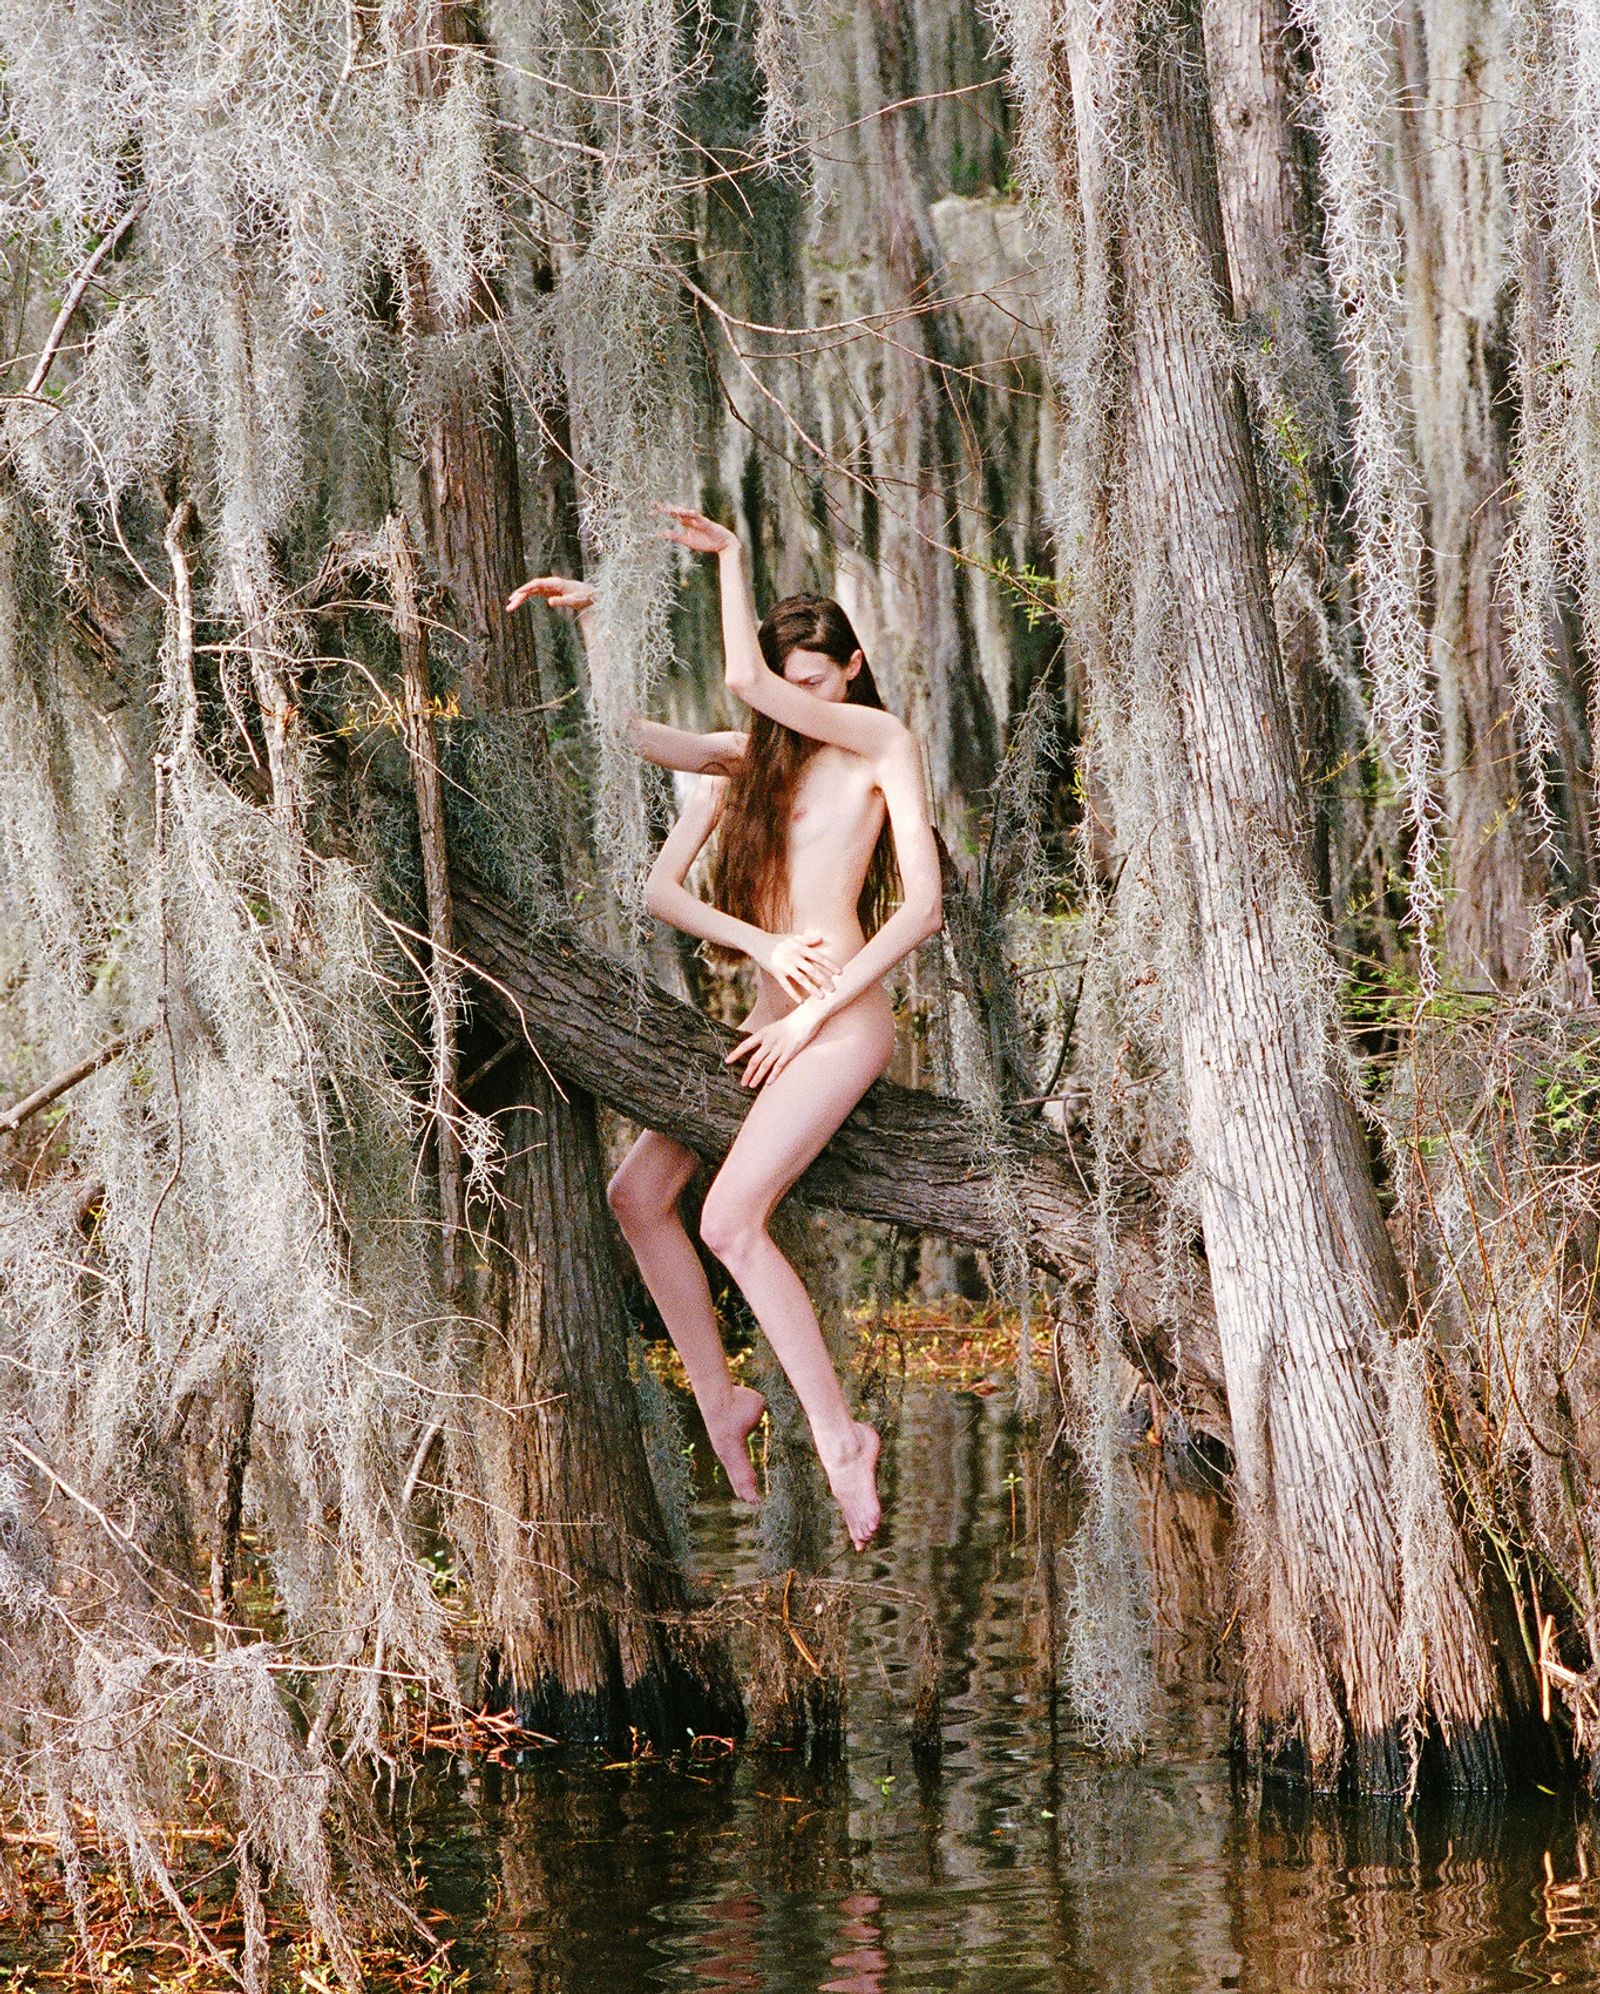 © Synchrodogs - Image from the Nature Twins photography project